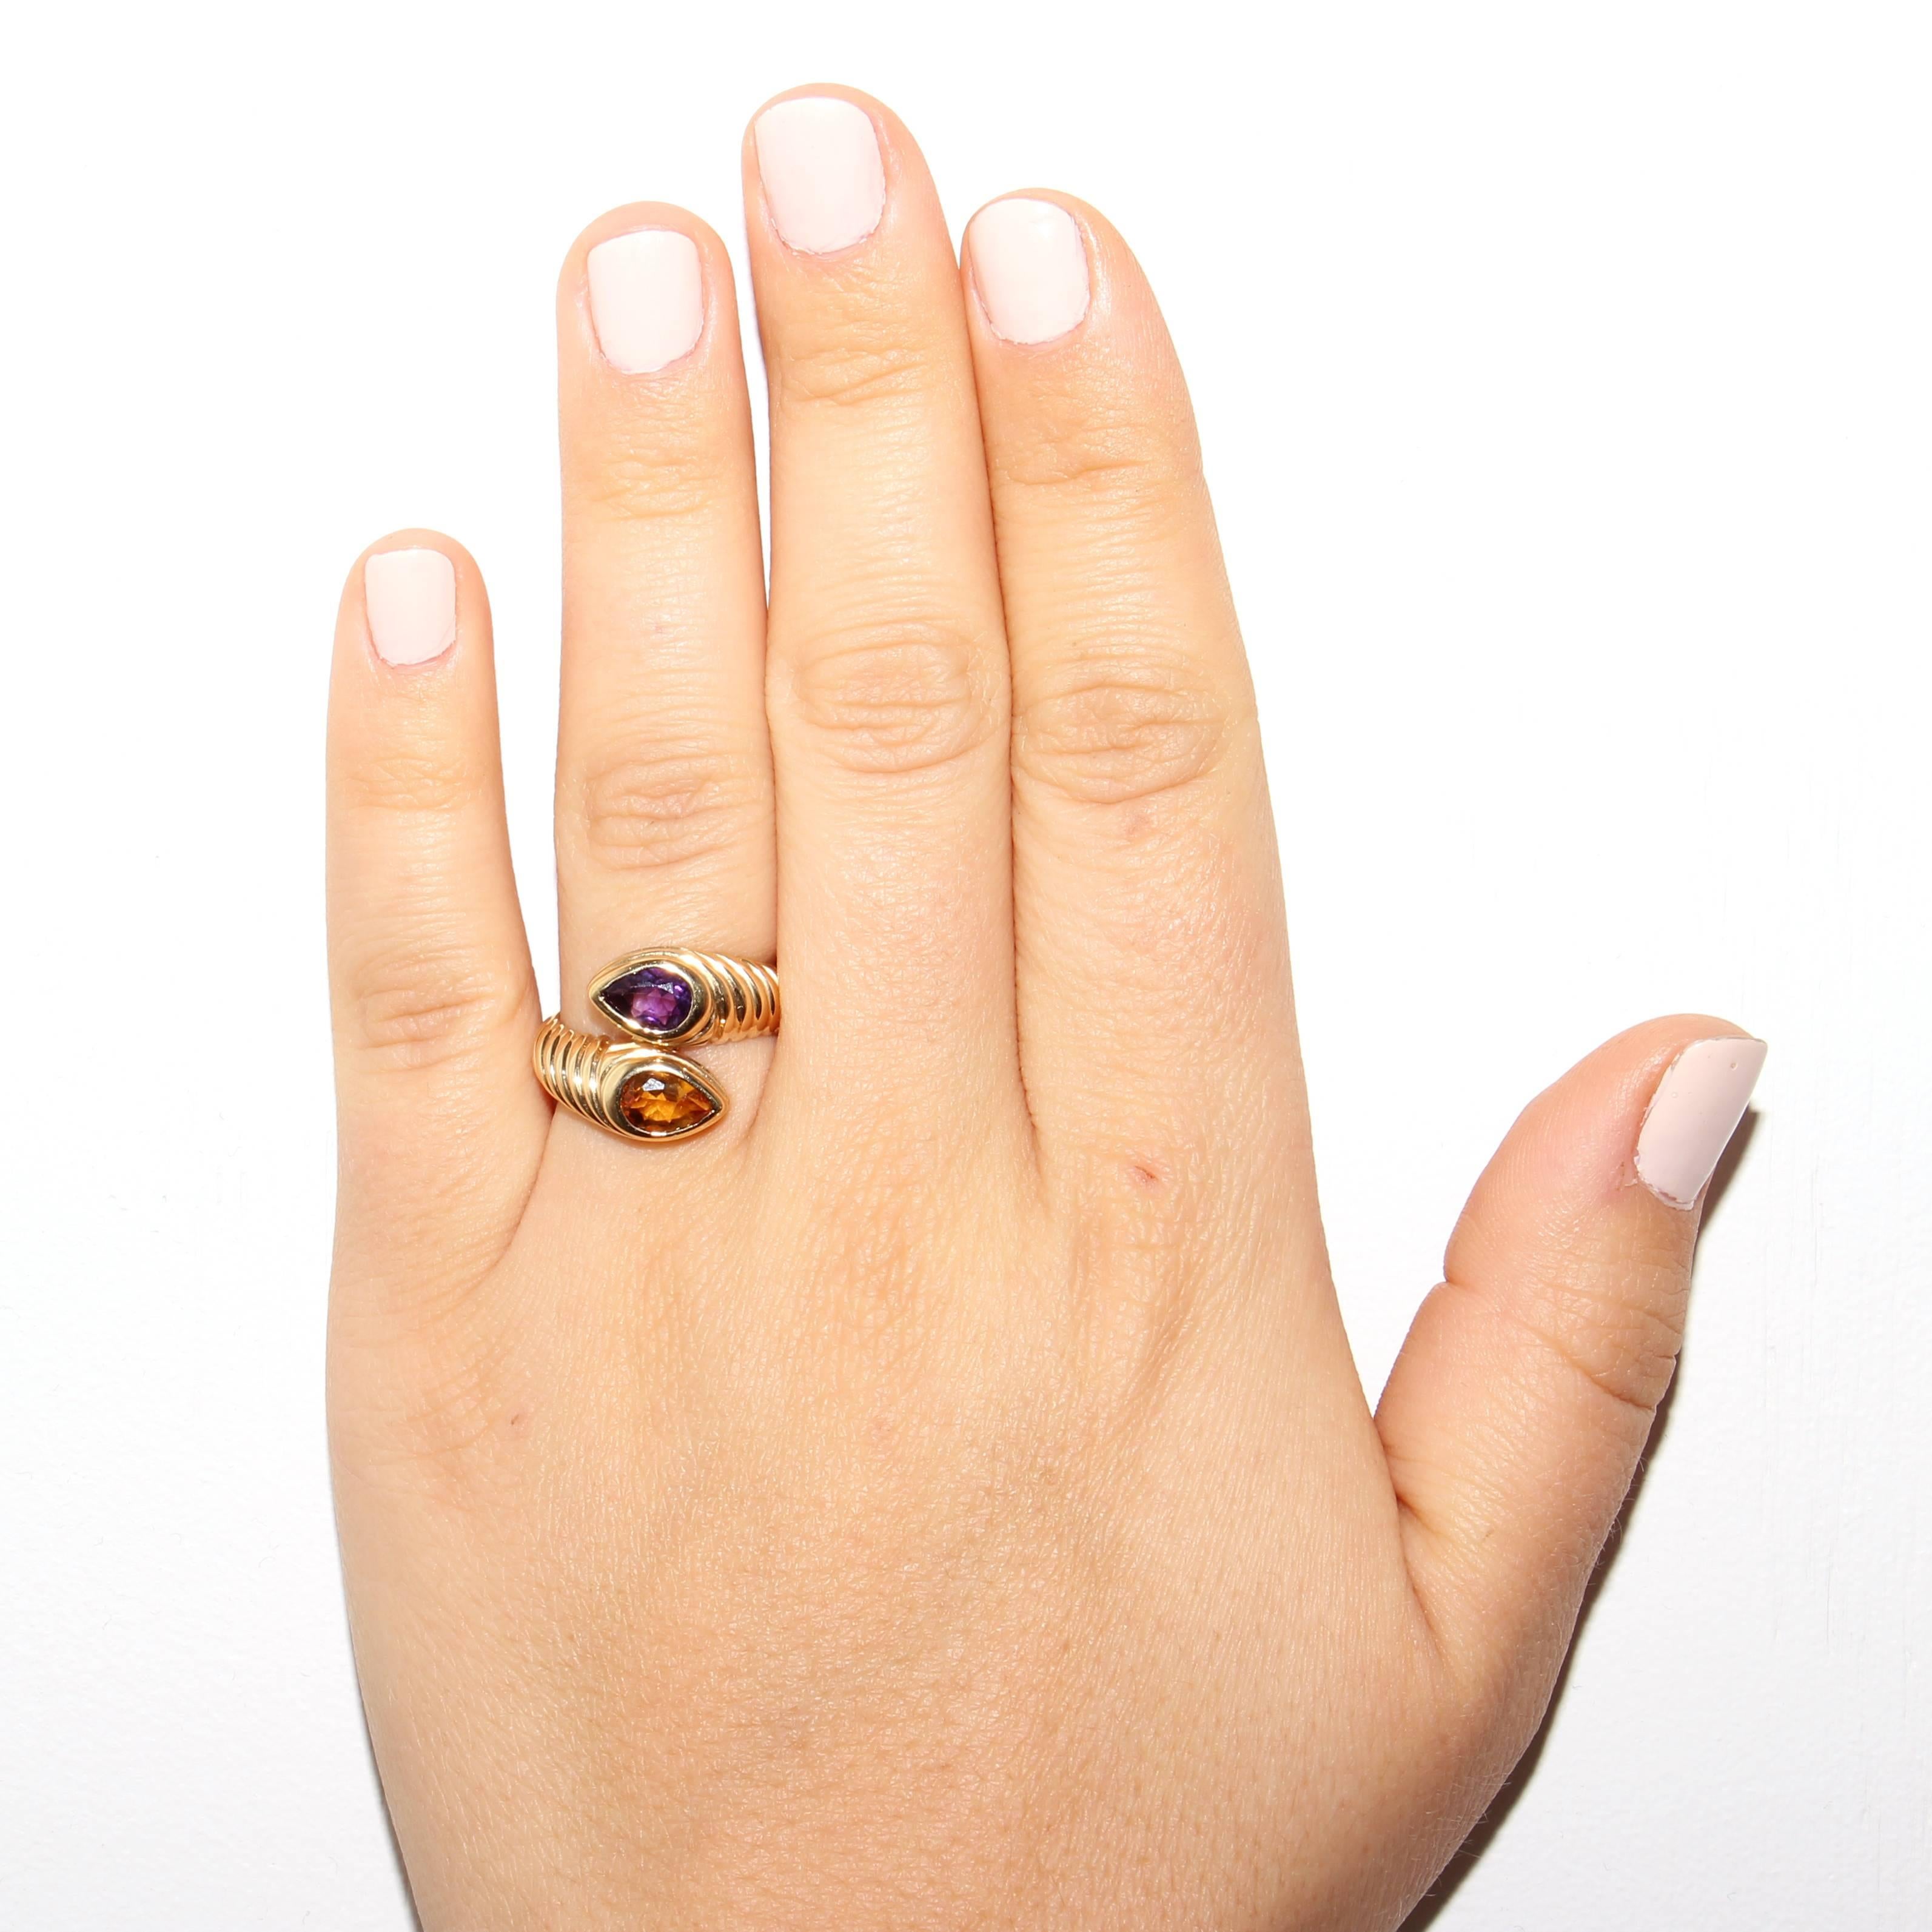 Stylish and colorful from Bulgari. Designed with a golden citrine and a purple amethyst set amid rolling contours of 18k gold. Signed Bvlgari. Ring size 6 and may be resized.
